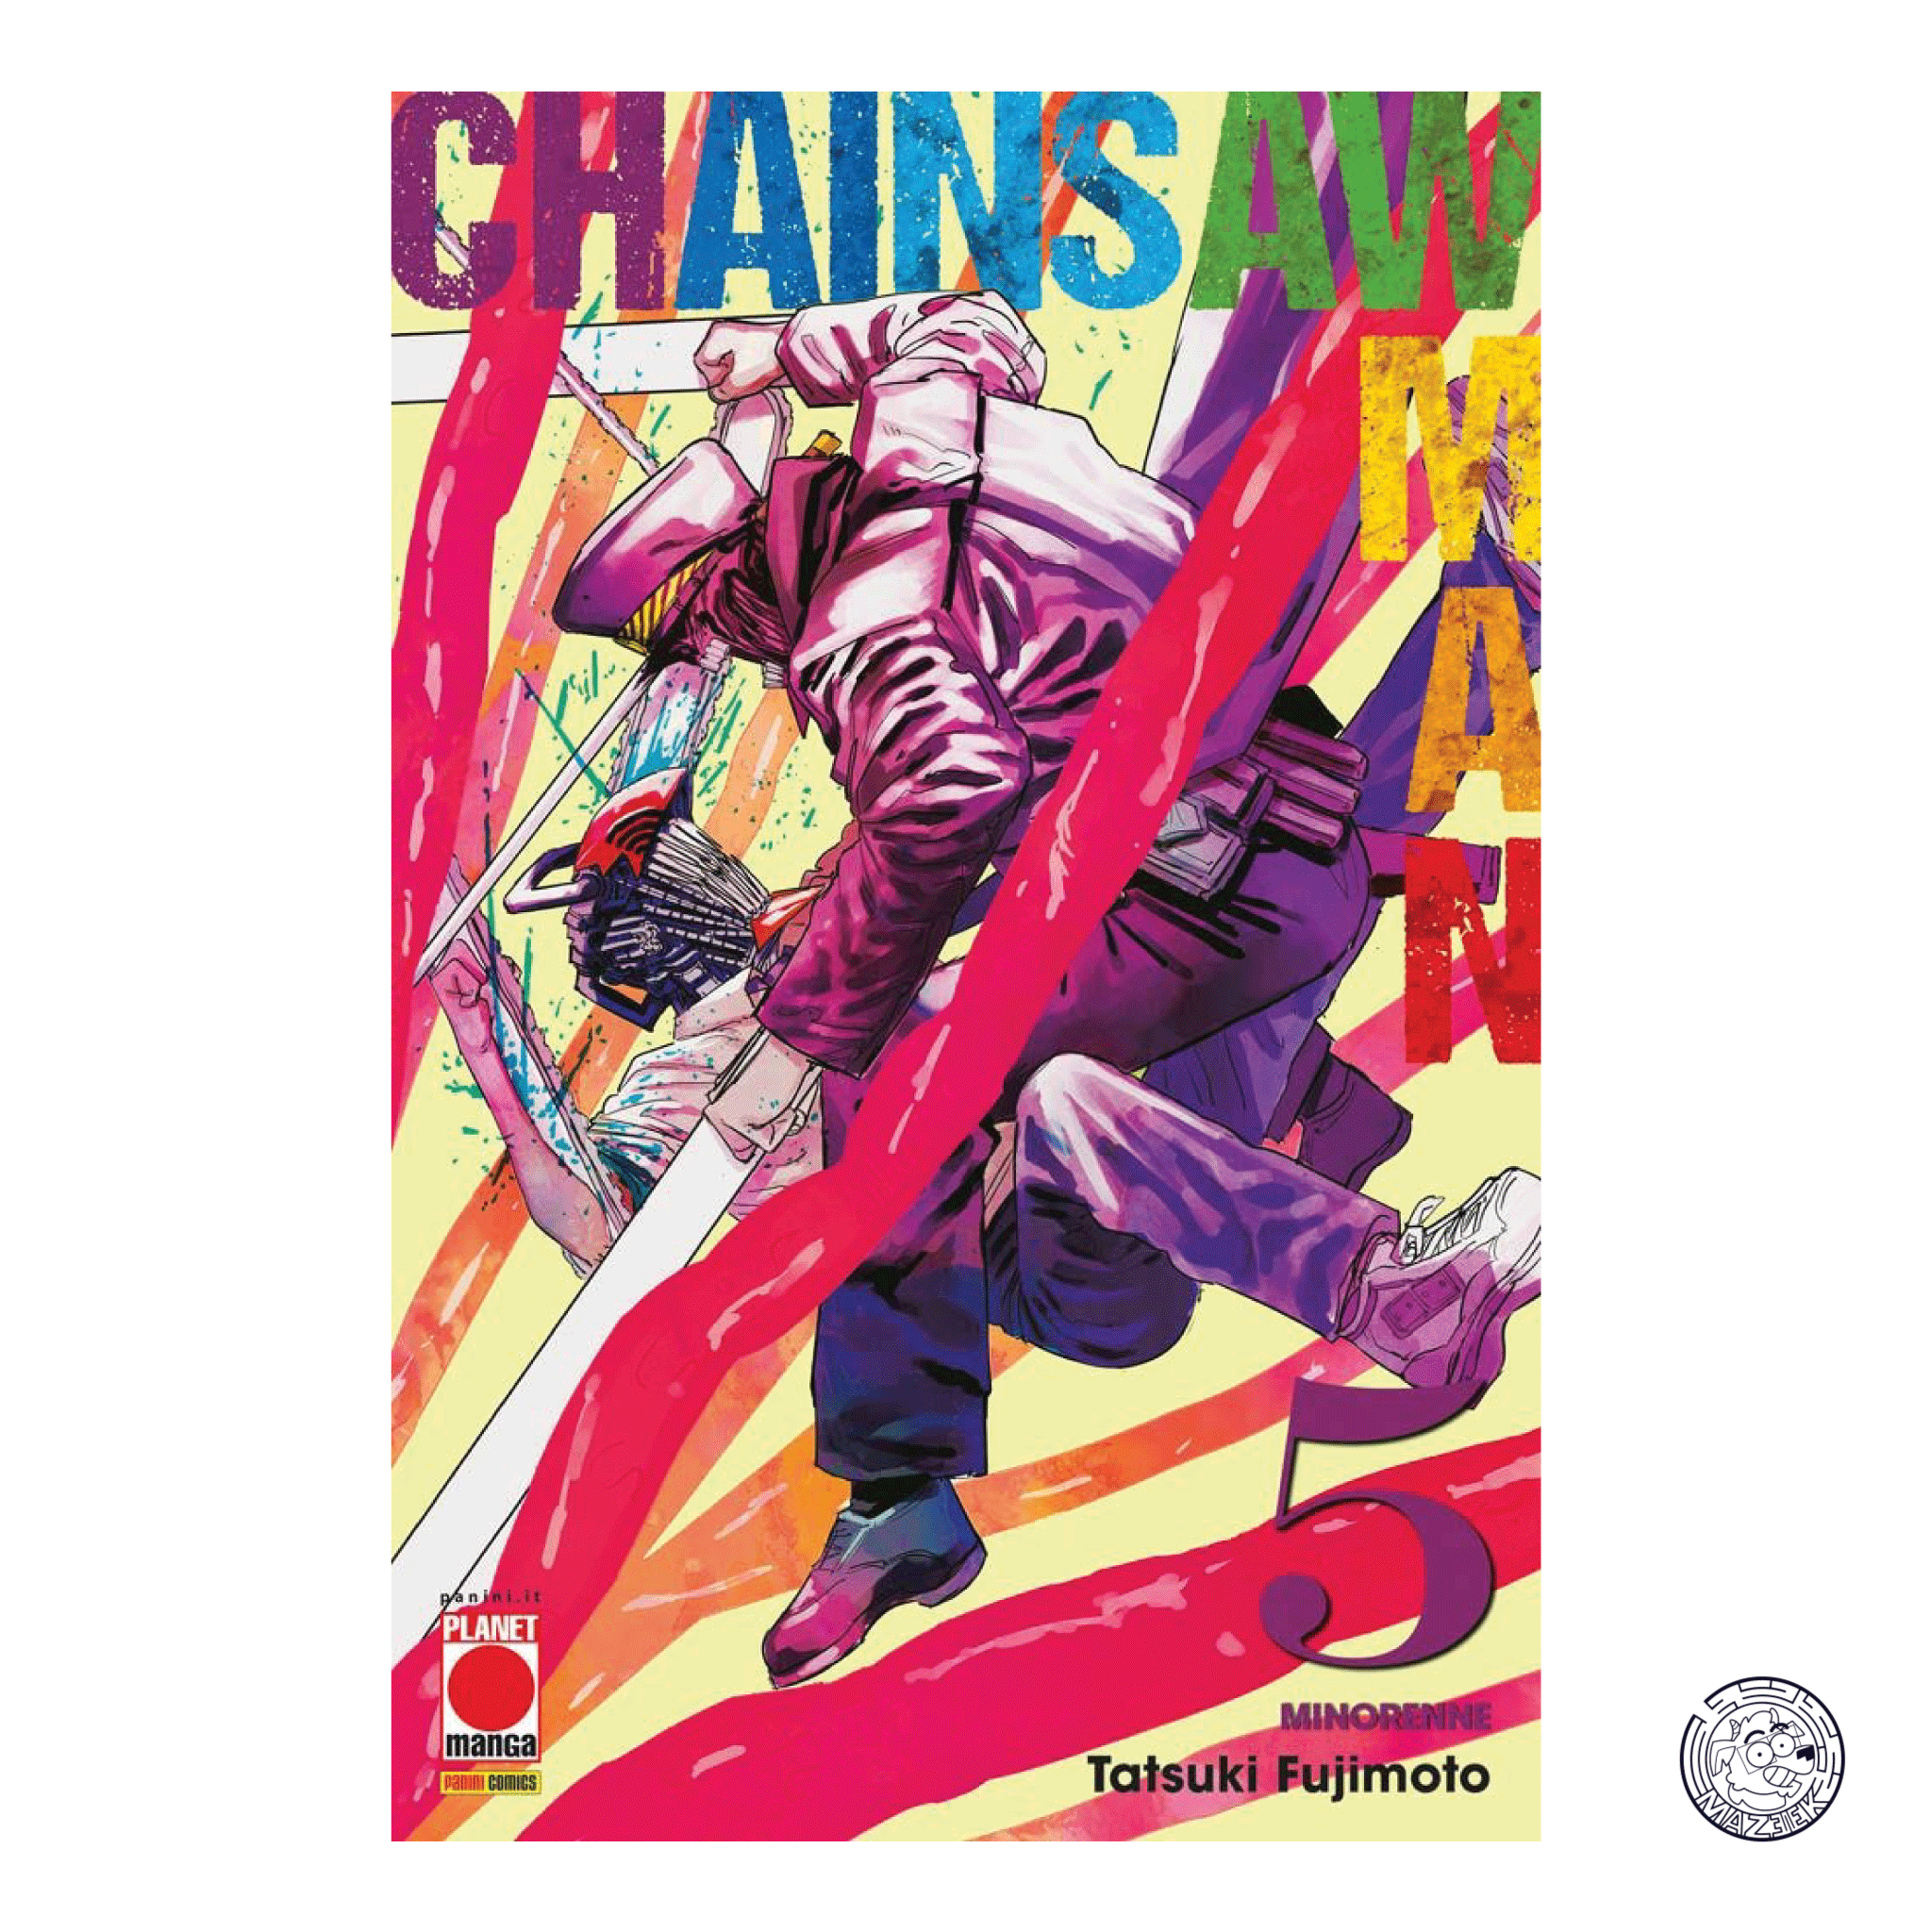 Chainsaw Man 05 - Second Printing